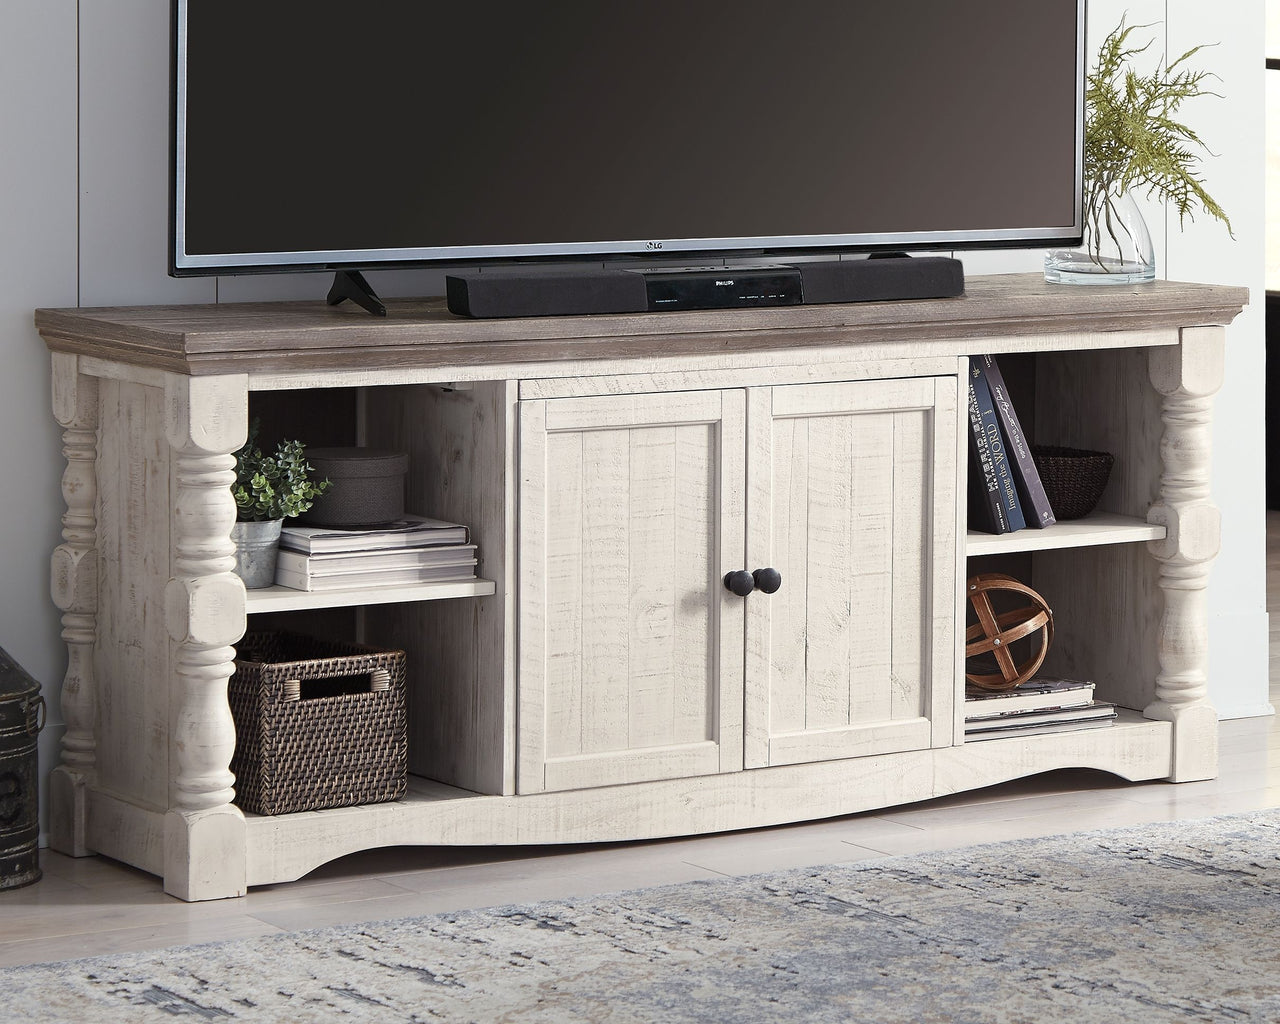 Havalance - Brown / Beige - 4 Pc. - Entertainment Center - 67" TV Stand - Tony's Home Furnishings